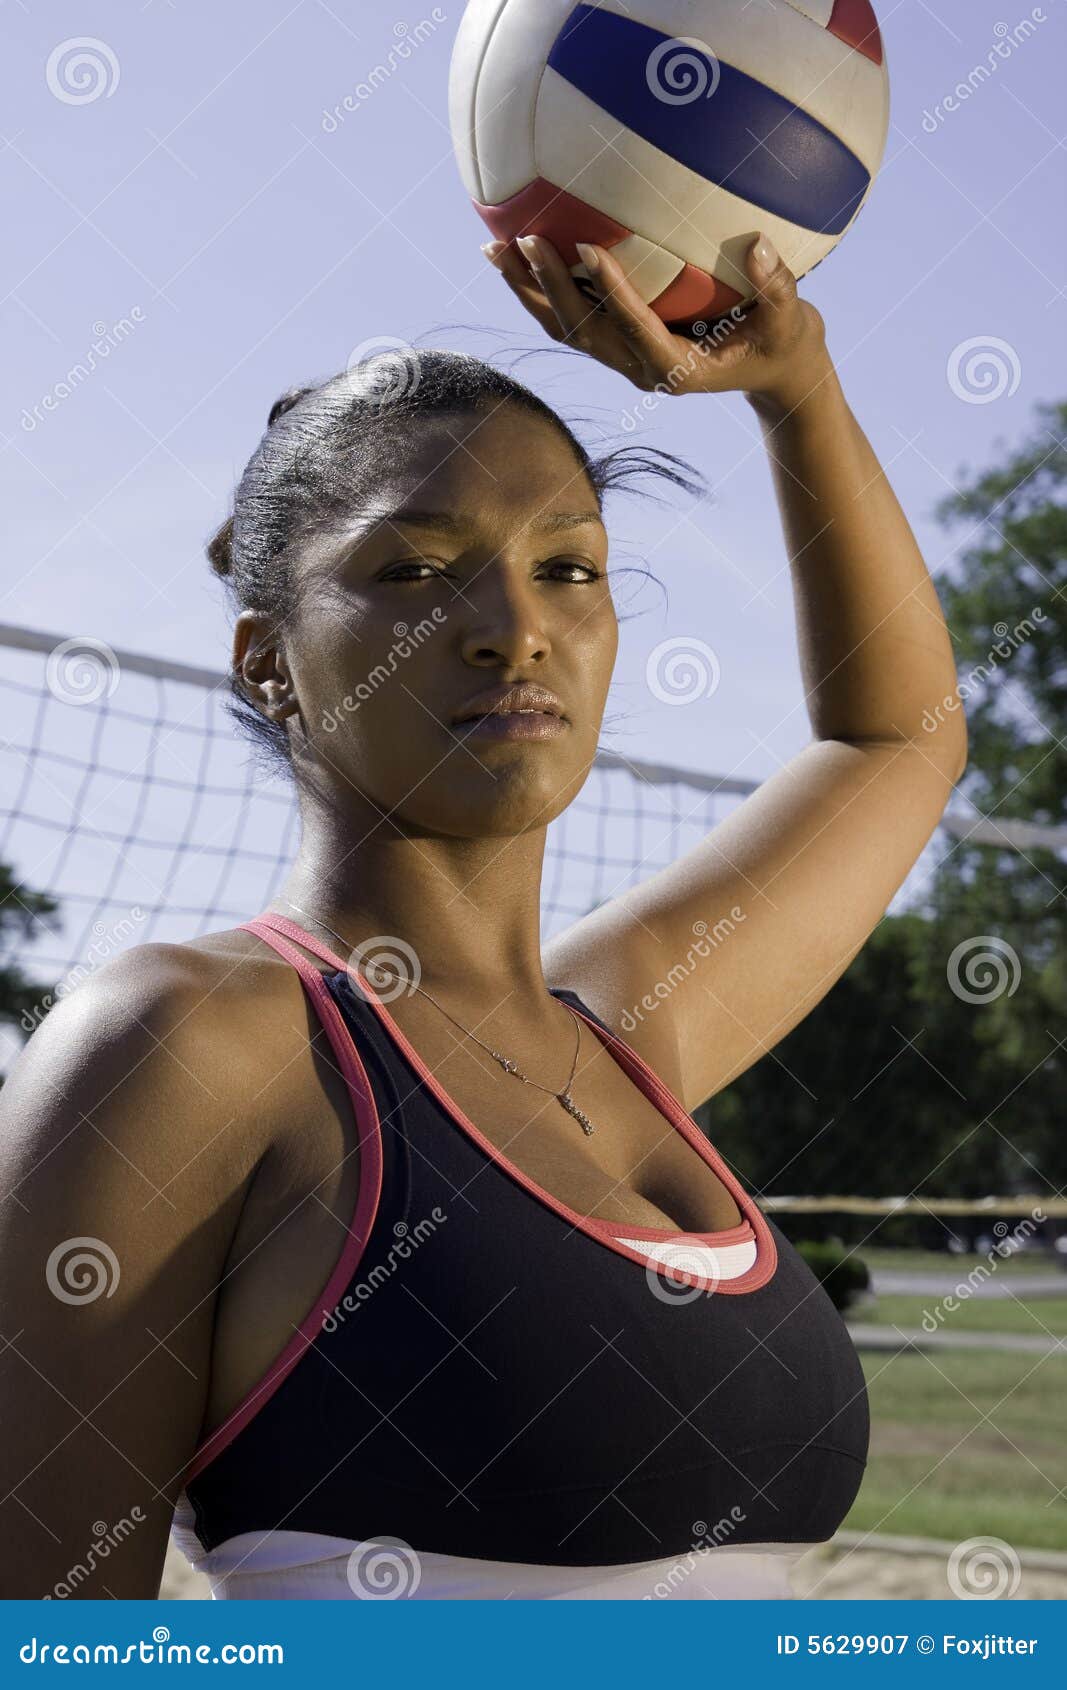 25,985 Women Playing Volley Ball Images, Stock Photos, 3D objects, &  Vectors | Shutterstock